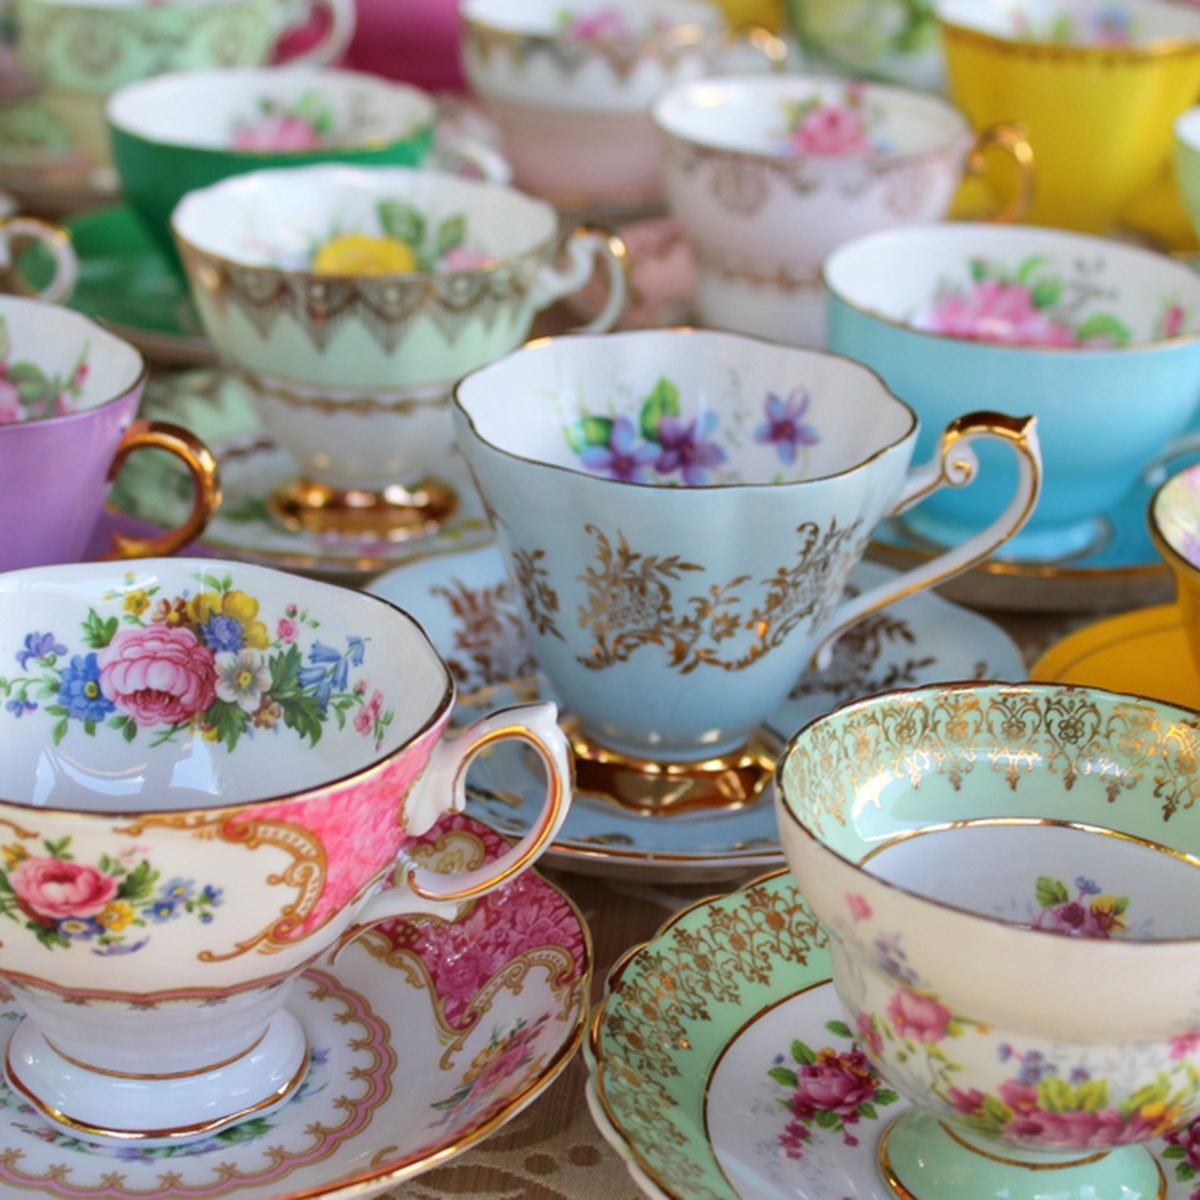 10 Things You Never Thought to Do With Your Vintage Teacups